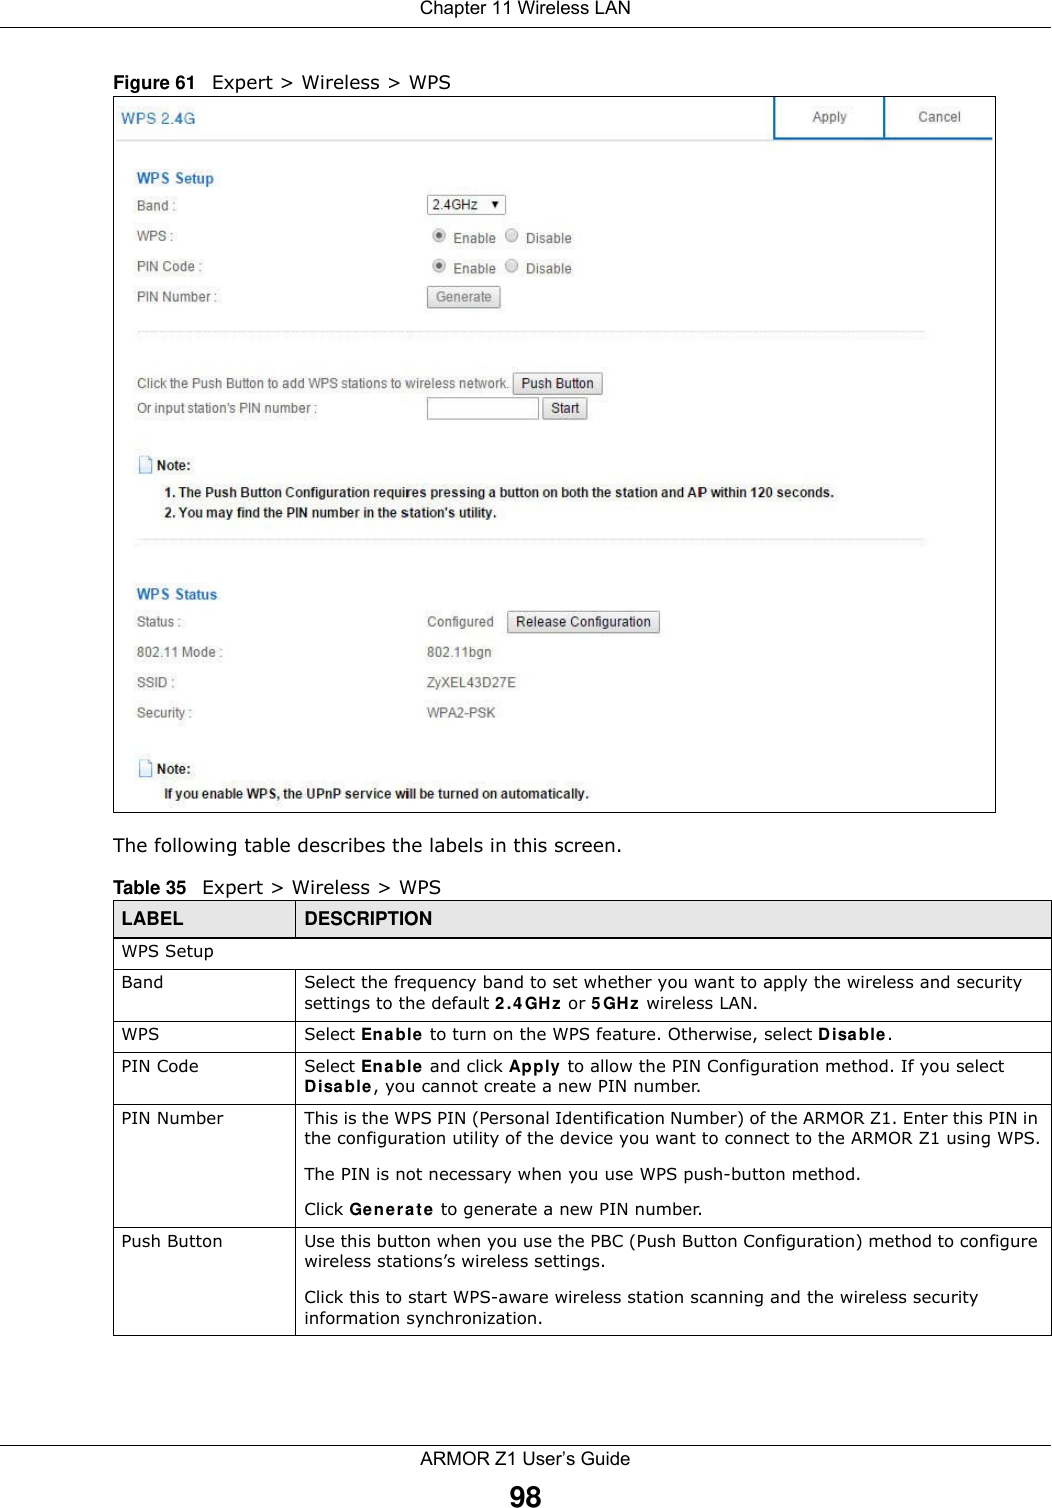 Chapter 11 Wireless LANARMOR Z1 User’s Guide98Figure 61   Expert &gt; Wireless &gt; WPSThe following table describes the labels in this screen.Table 35   Expert &gt; Wireless &gt; WPSLABEL DESCRIPTIONWPS SetupBand Select the frequency band to set whether you want to apply the wireless and security settings to the default 2.4GHz or 5GHz wireless LAN. WPS Select Enable to turn on the WPS feature. Otherwise, select Disable.PIN Code Select Enable and click Apply to allow the PIN Configuration method. If you select Disable, you cannot create a new PIN number.PIN Number This is the WPS PIN (Personal Identification Number) of the ARMOR Z1. Enter this PIN in the configuration utility of the device you want to connect to the ARMOR Z1 using WPS.The PIN is not necessary when you use WPS push-button method.Click Generate to generate a new PIN number.Push Button Use this button when you use the PBC (Push Button Configuration) method to configure wireless stations’s wireless settings. Click this to start WPS-aware wireless station scanning and the wireless security information synchronization. 